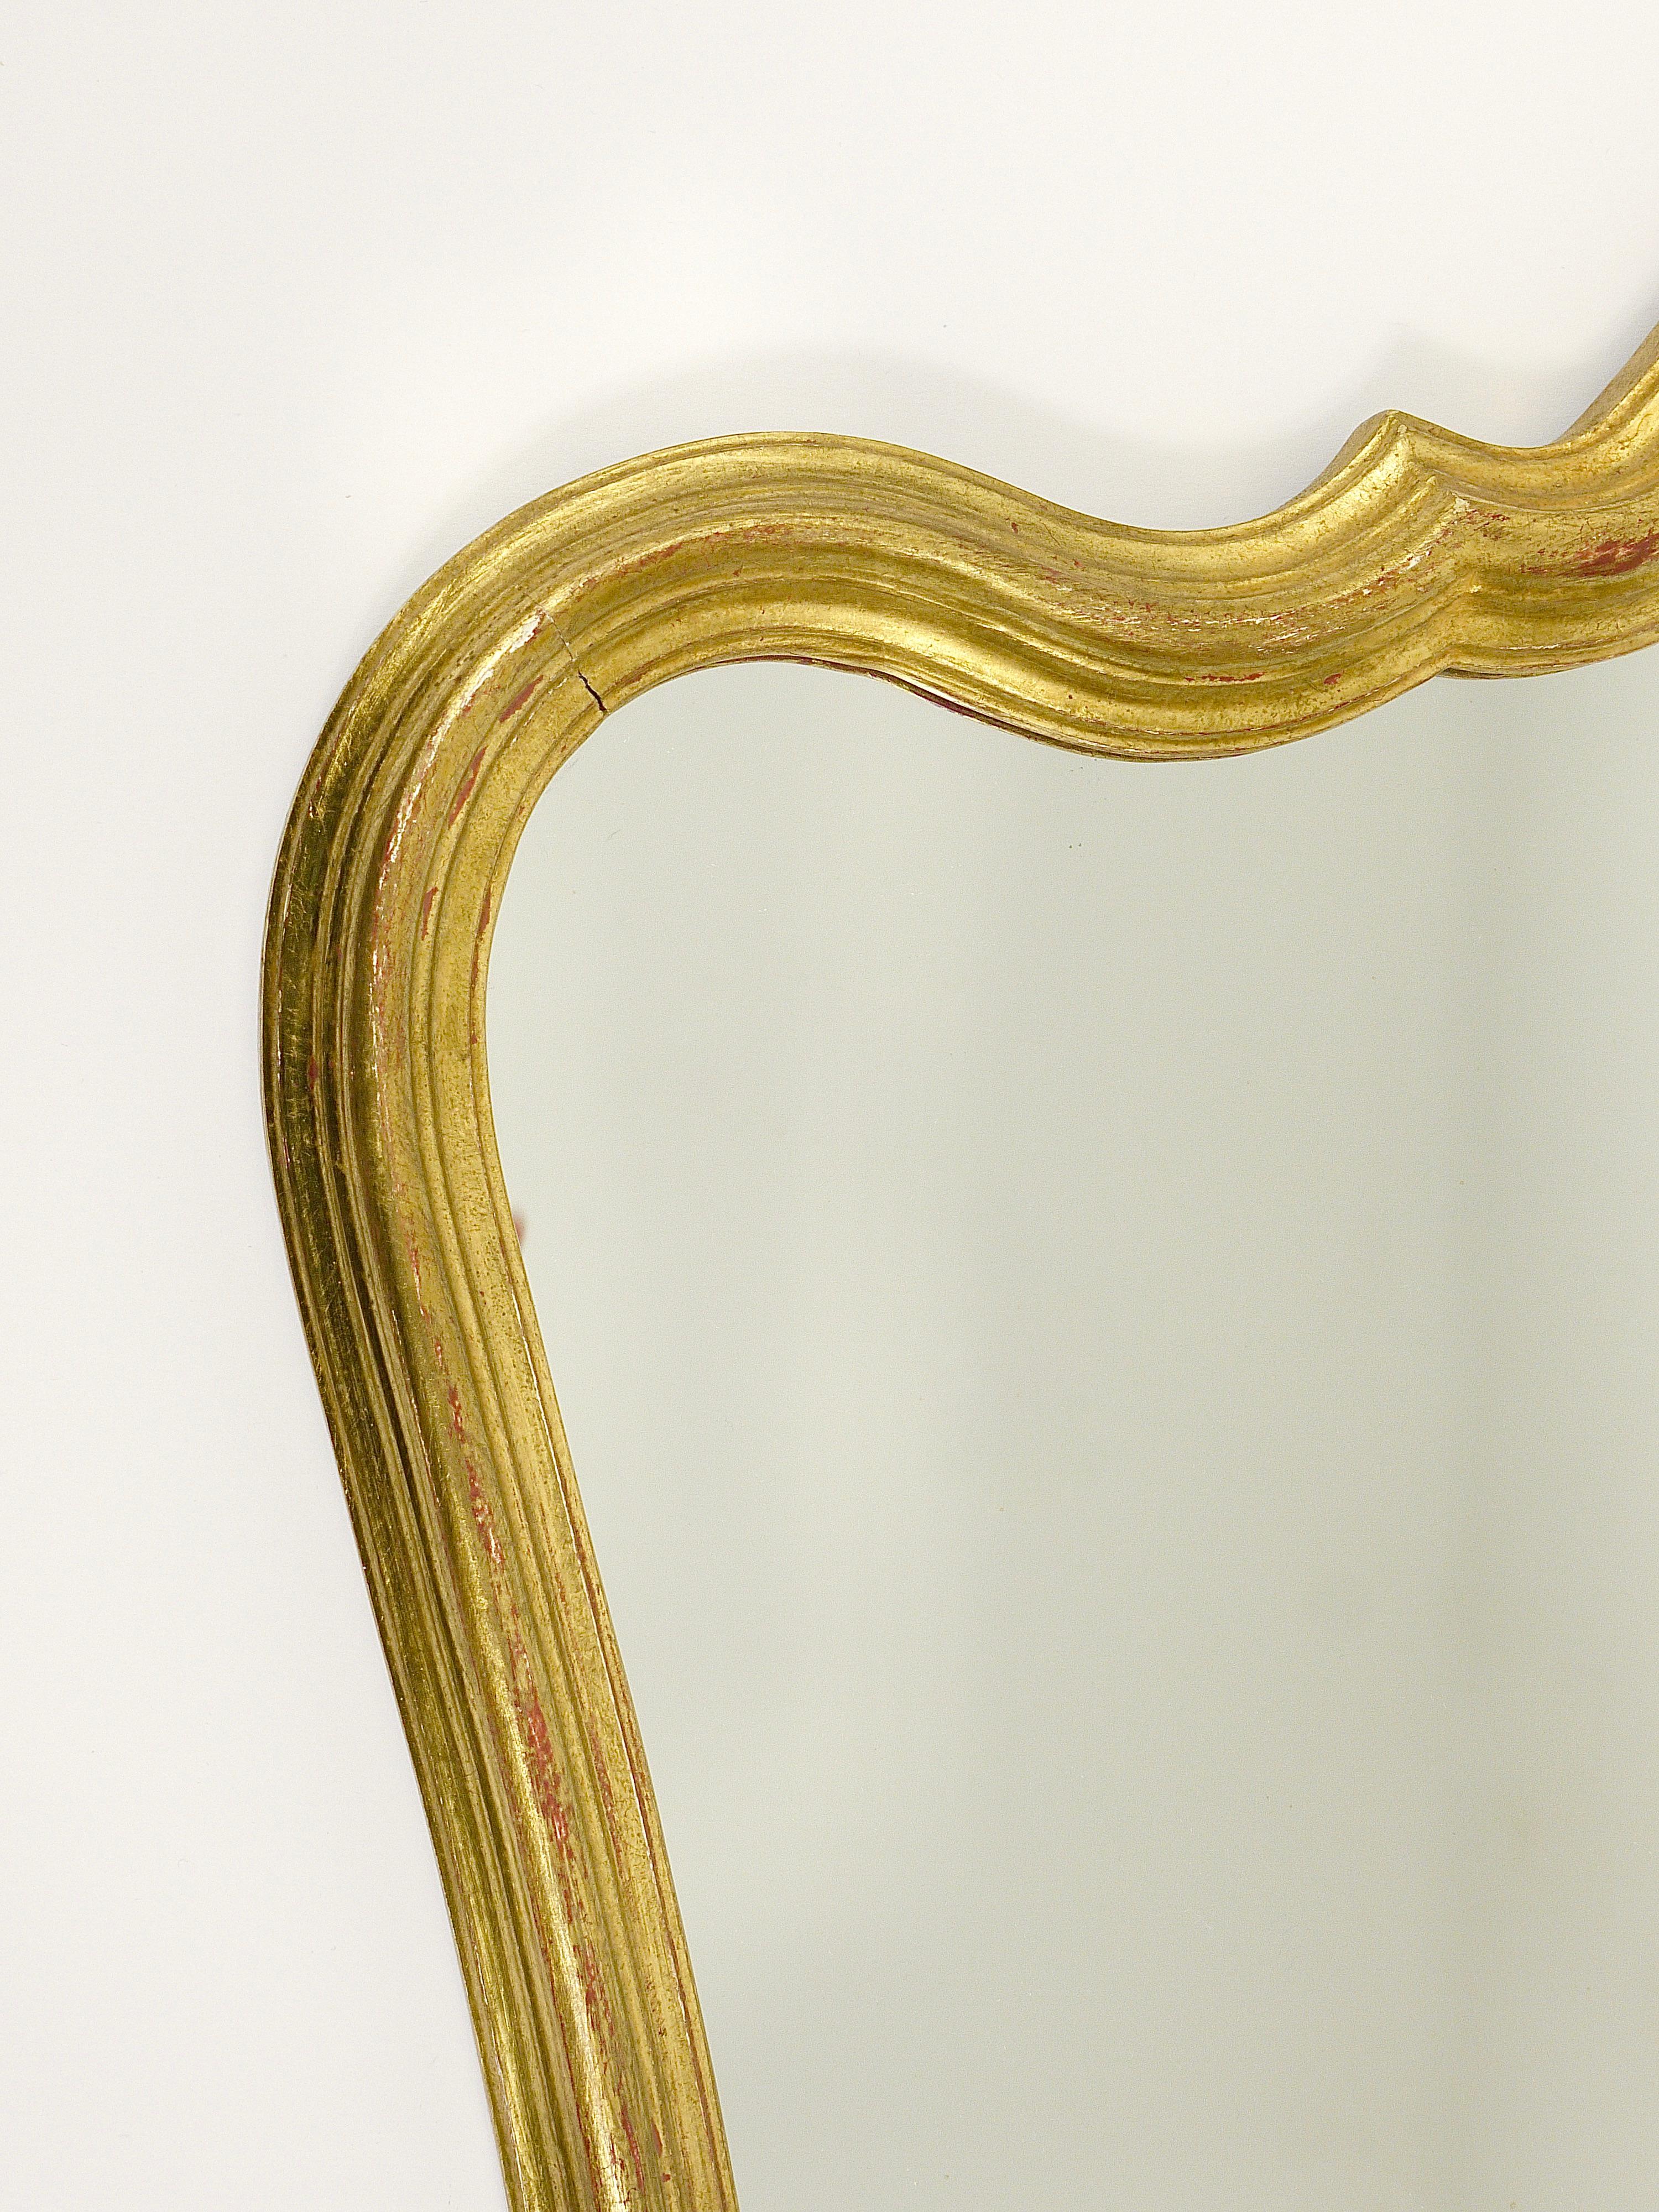 Chelini Firenze Curved Gilt Wood Mid-Century Wall Mirror, Italy, 1950s For Sale 5